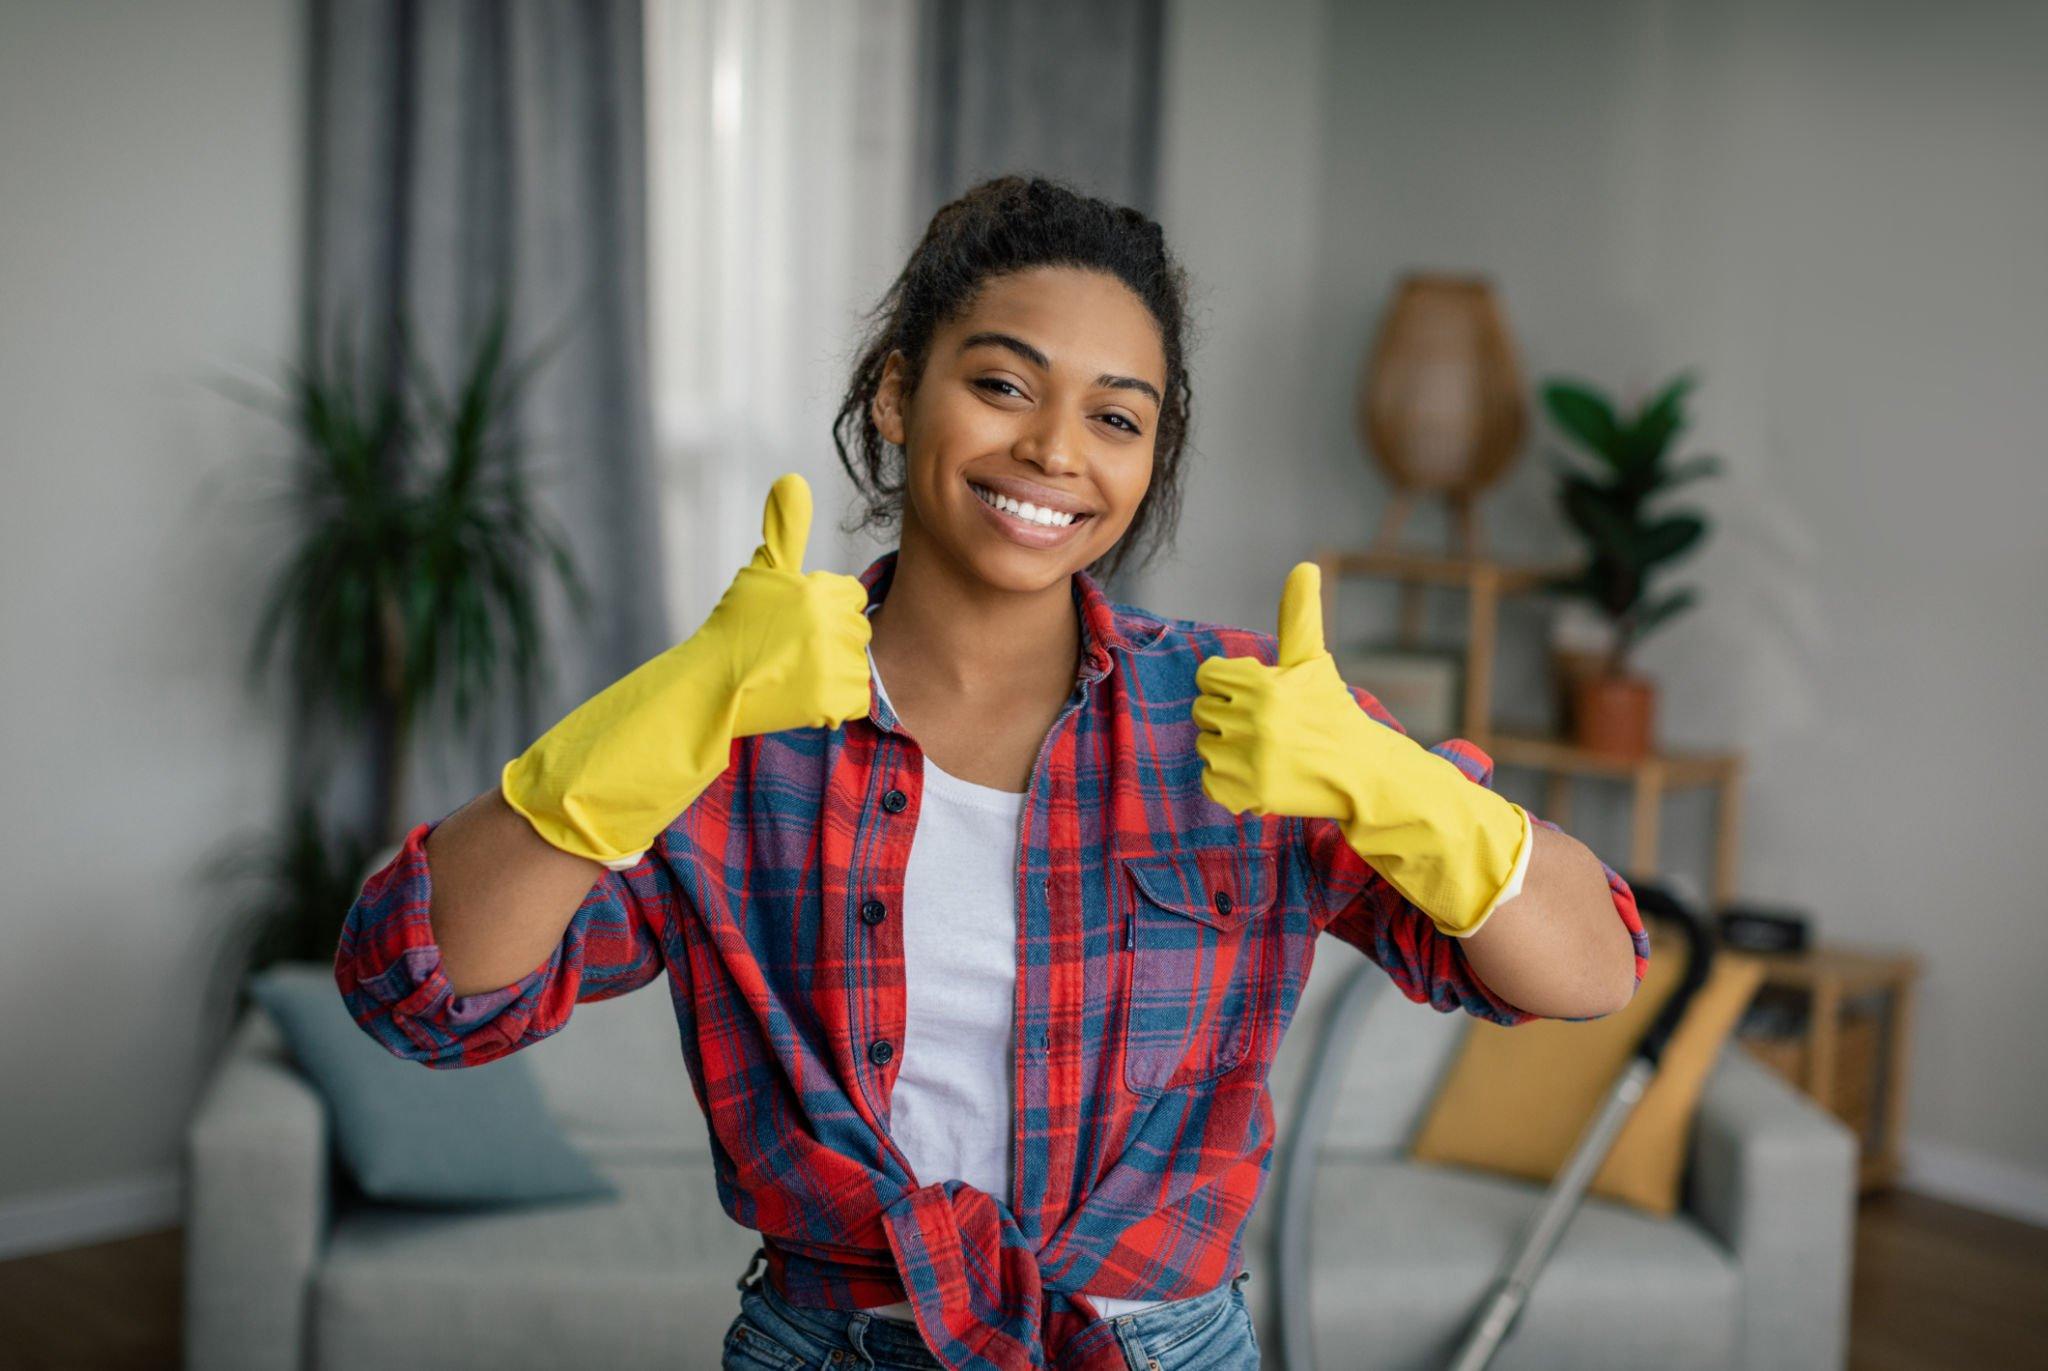 Looking for a steady and stable job as a residential cleaner / housekeeper from a company with a proven history then this residential cleaner / housekeeper job is for you.